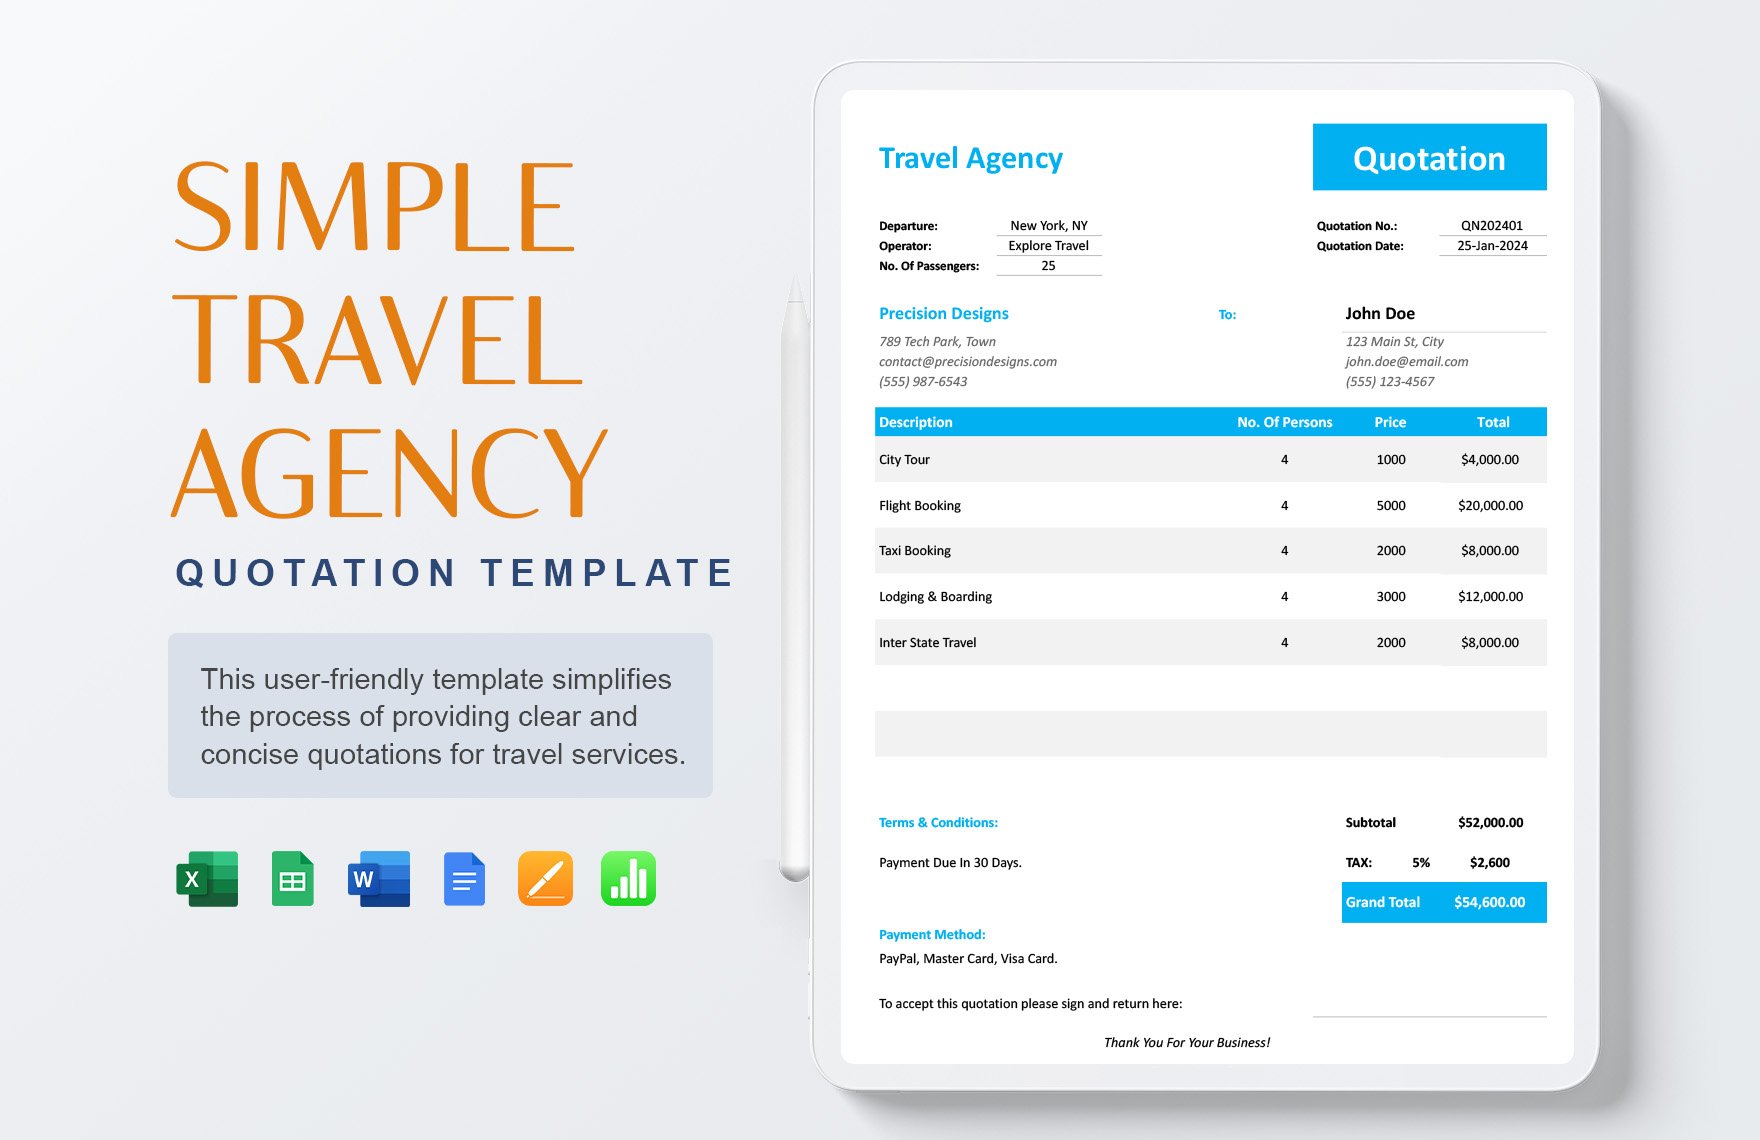 Simple Travel Agency Quotation Template